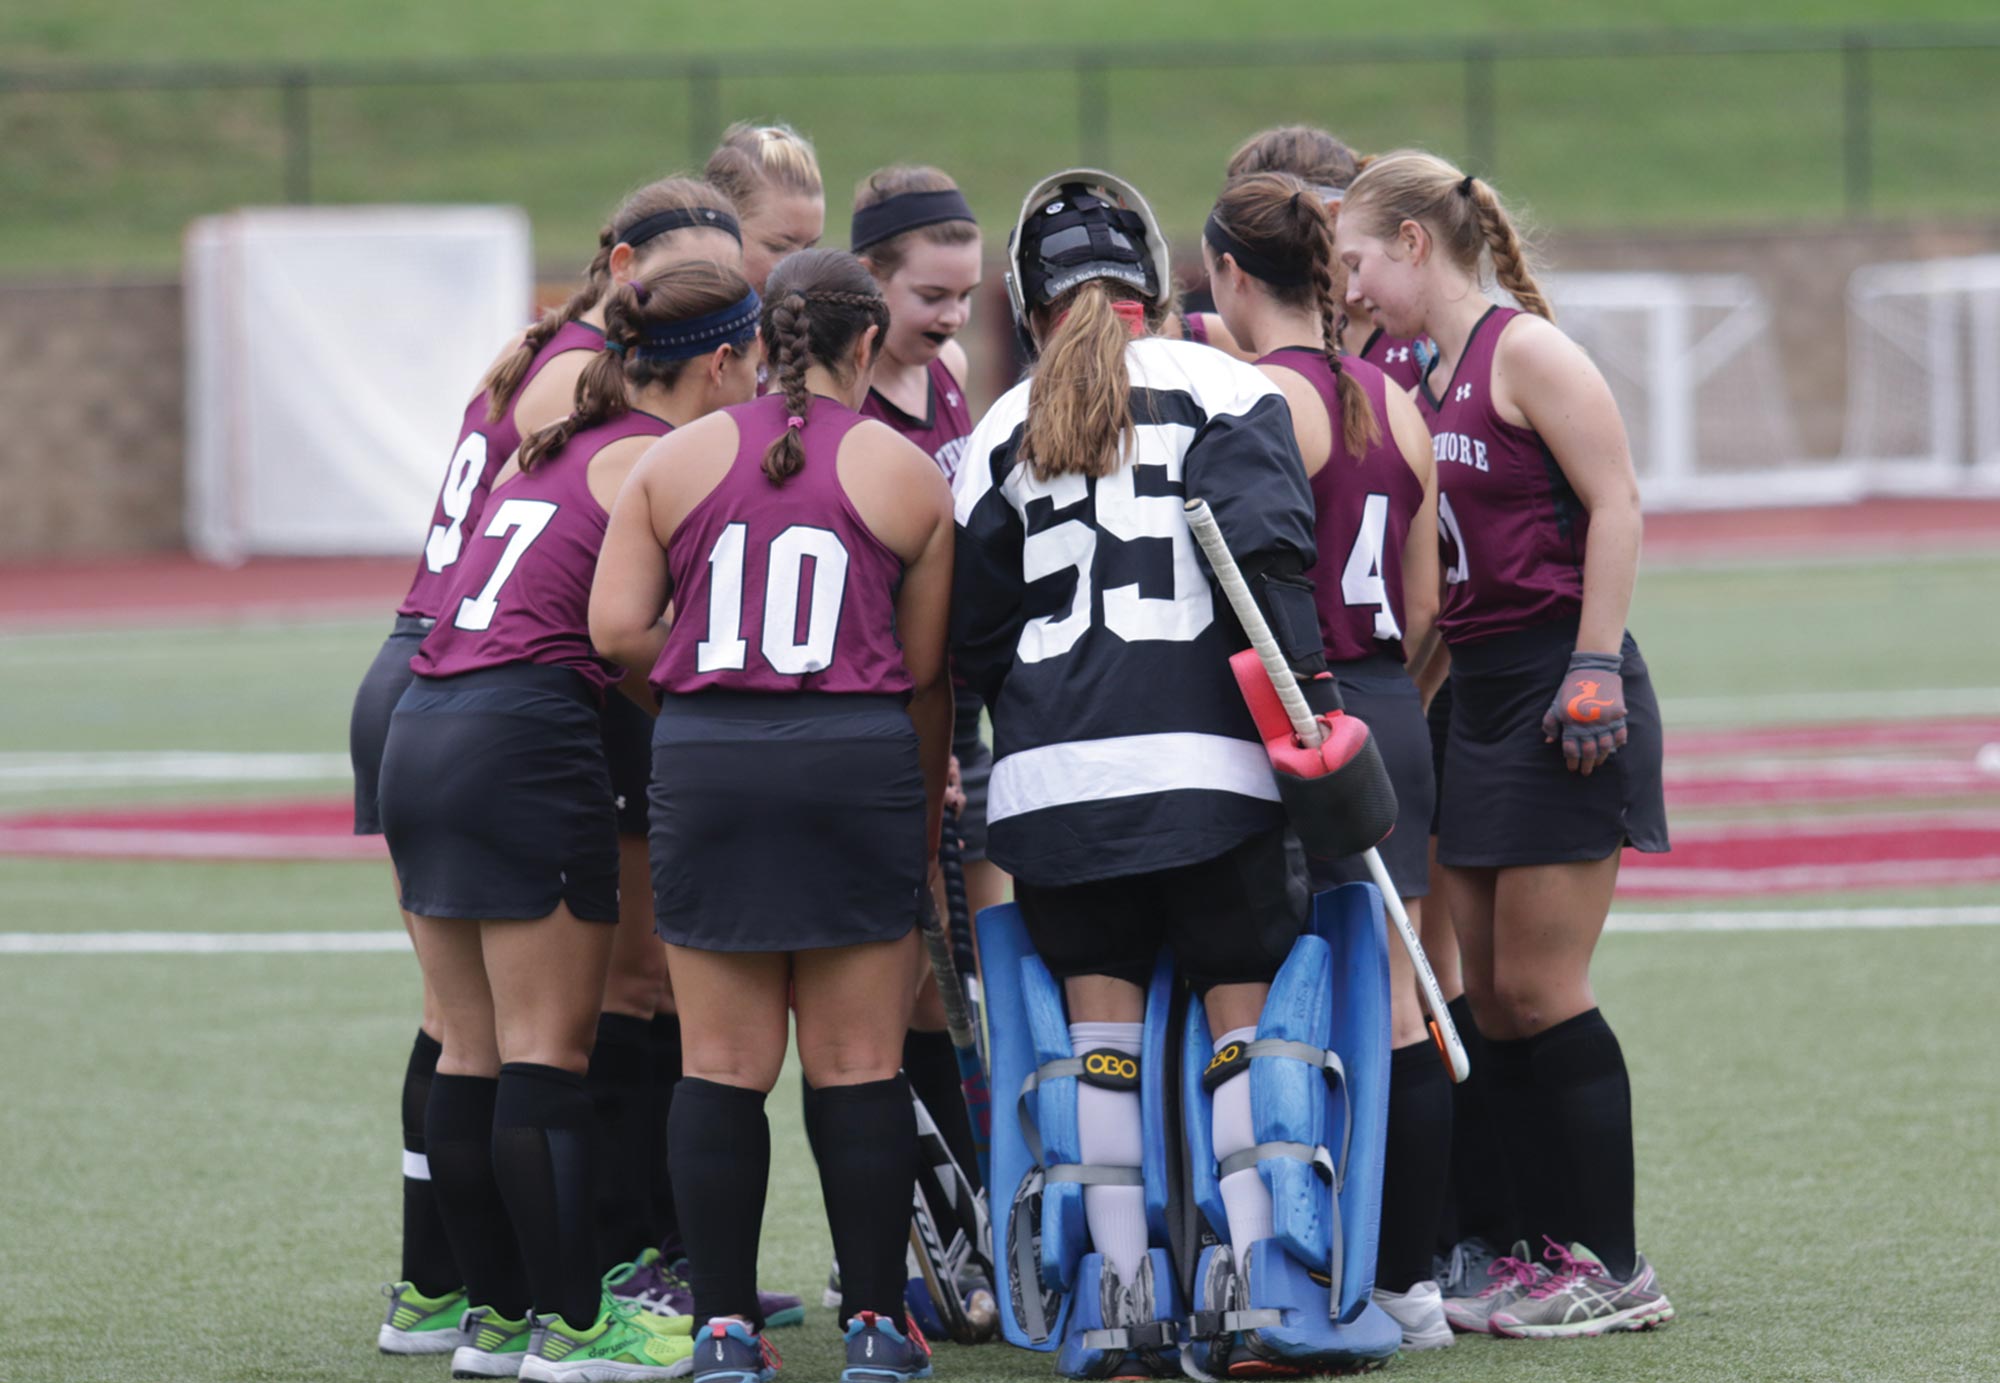 the women's field hockey team stands in a huddle